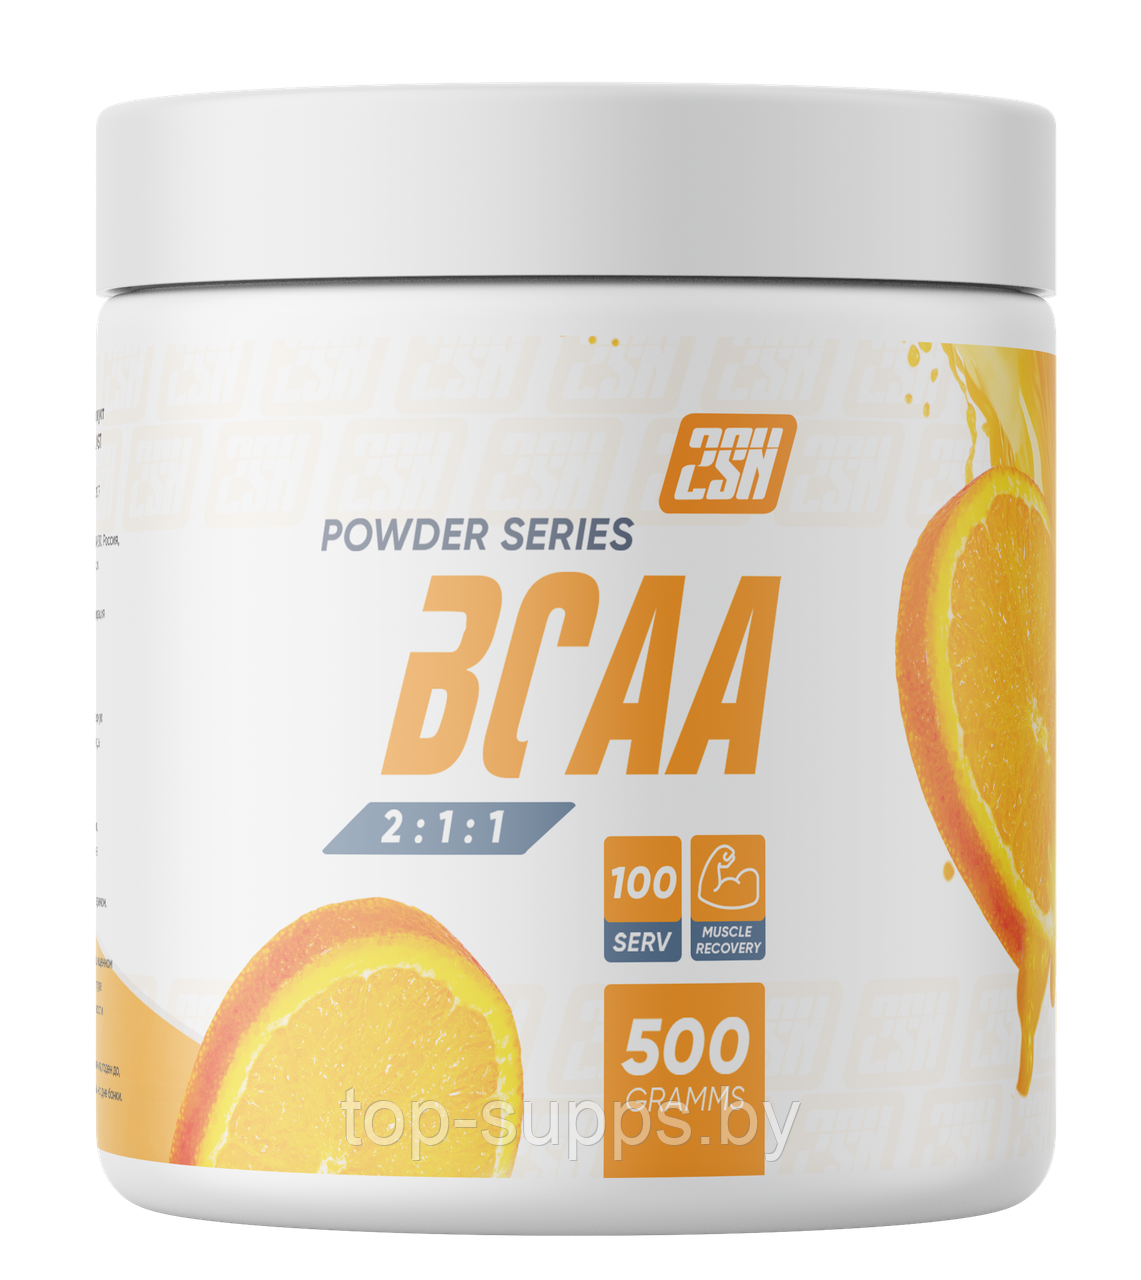 2SN BCAA 2:1:1 Powder from 2SN, 500g (100 servings) - фото 1 - id-p208806361